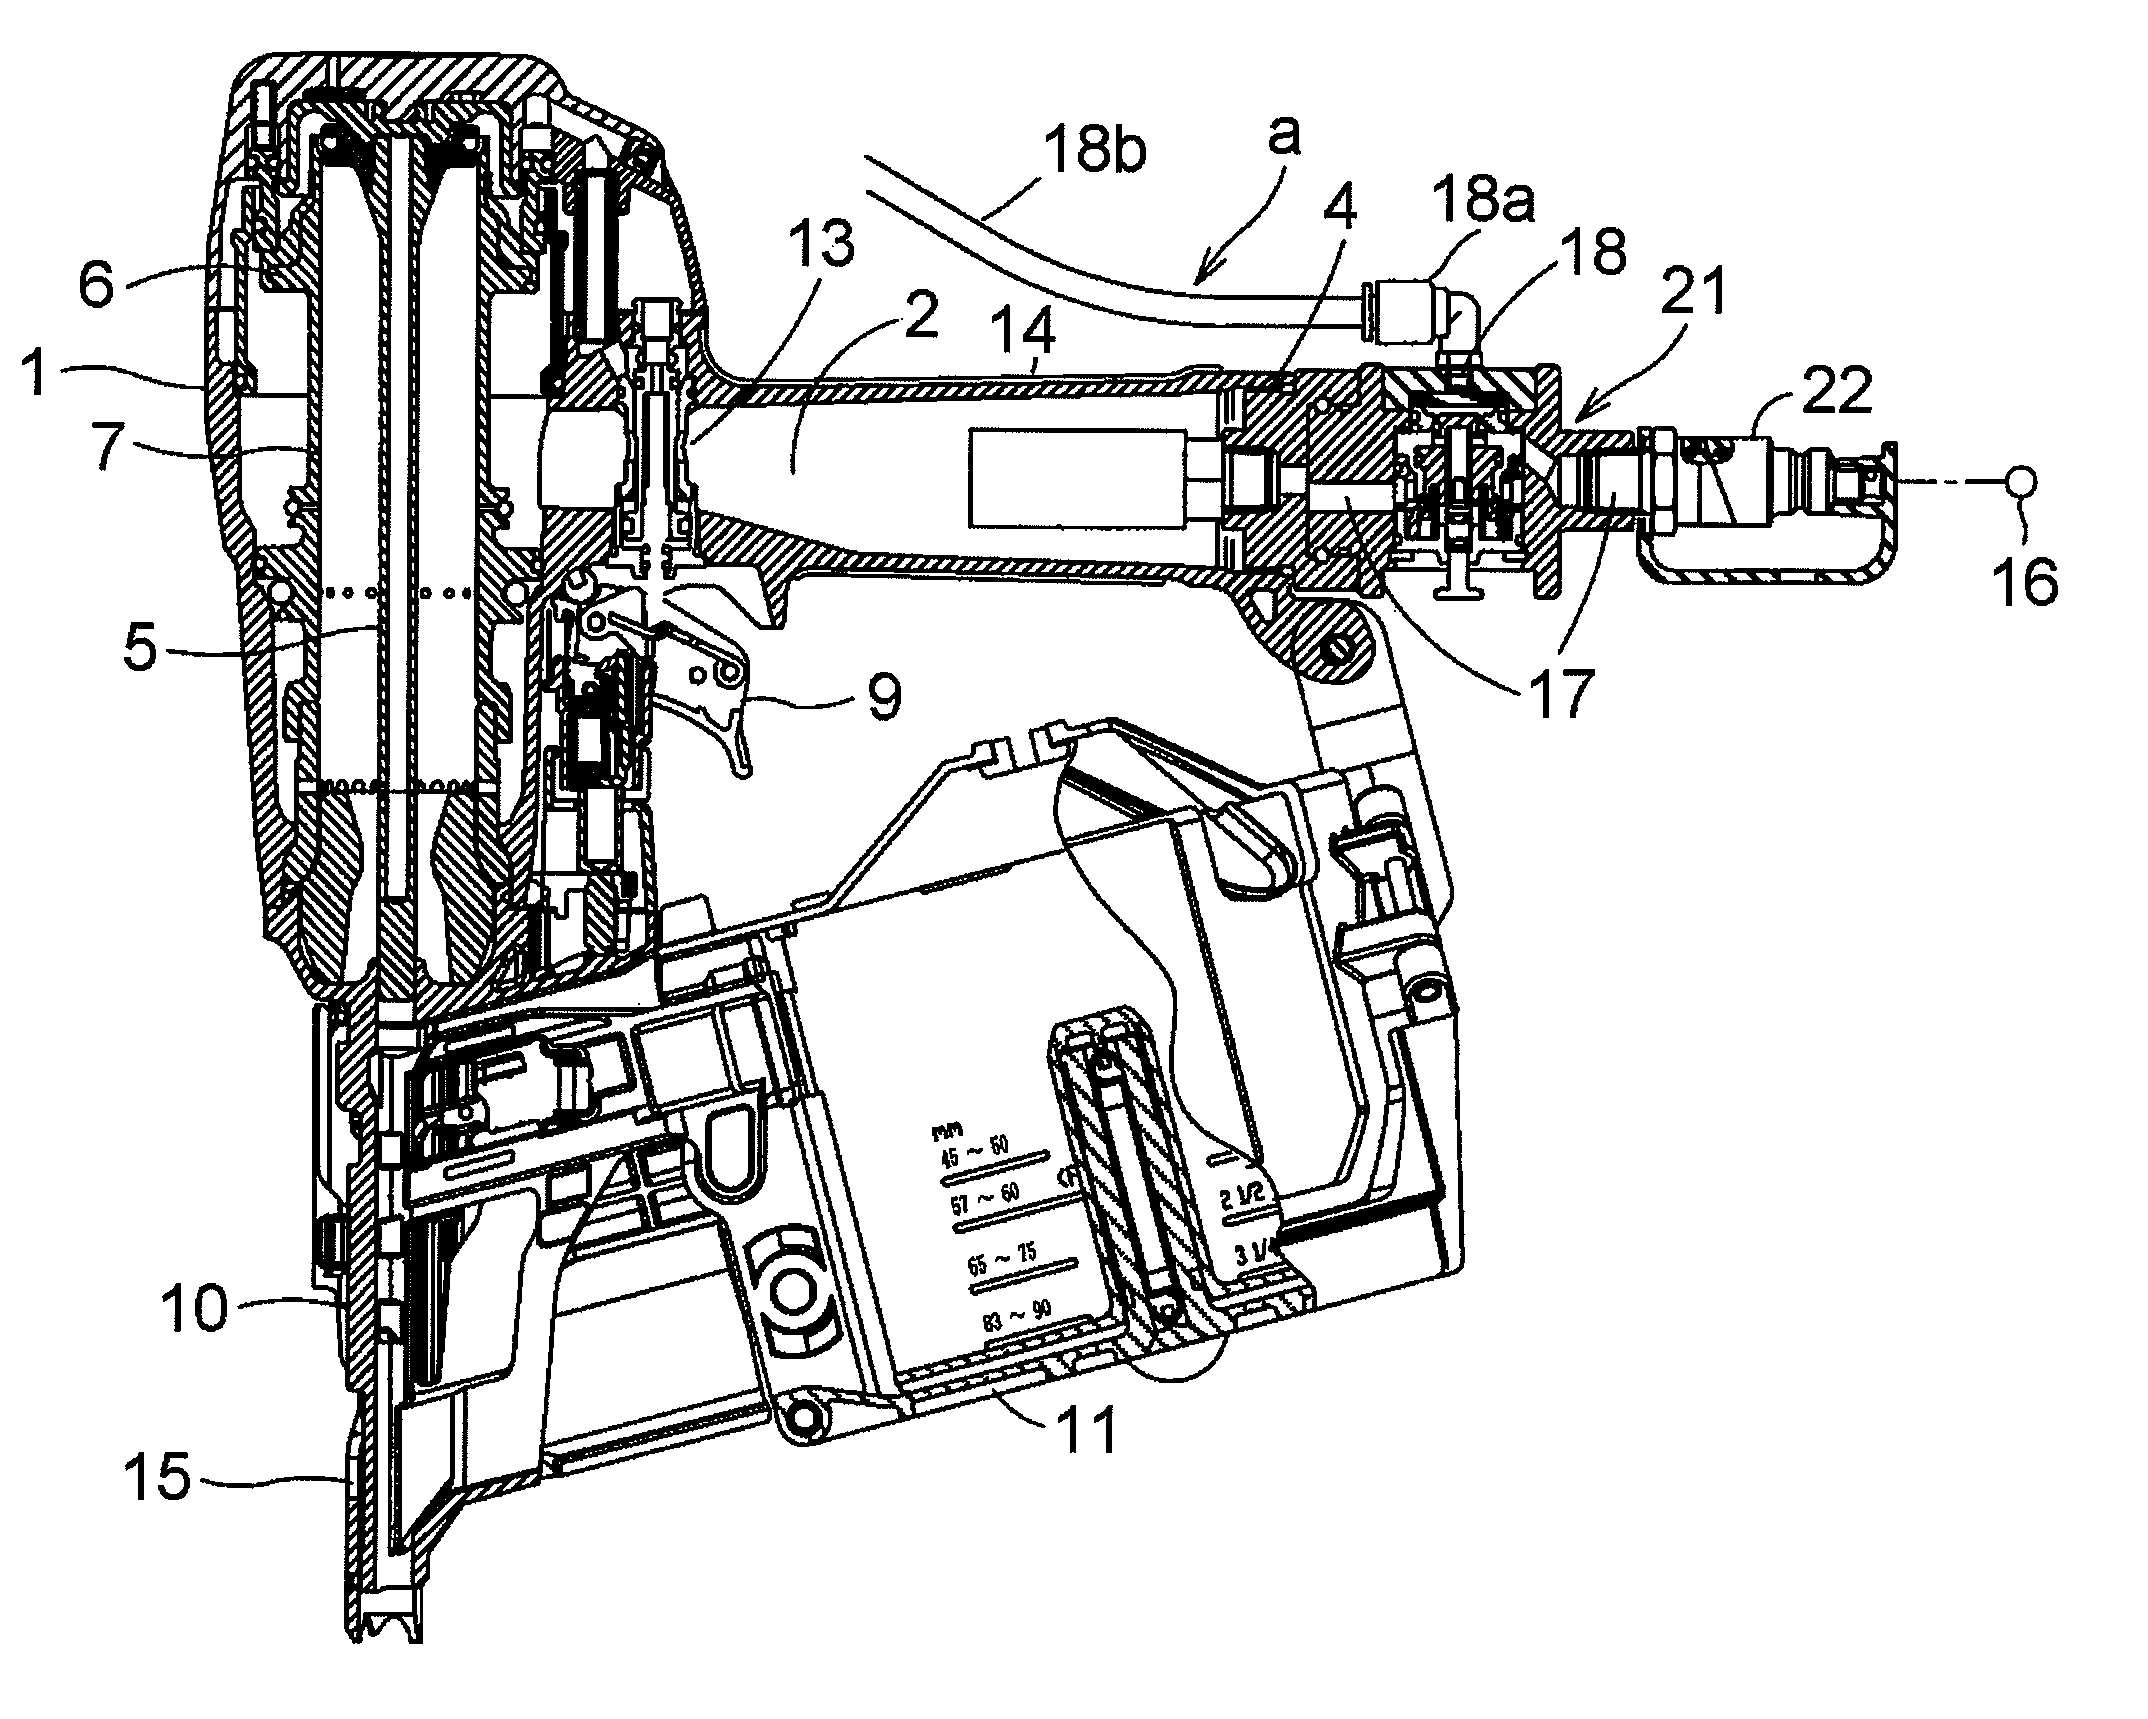 Pneumatic tool with air duster